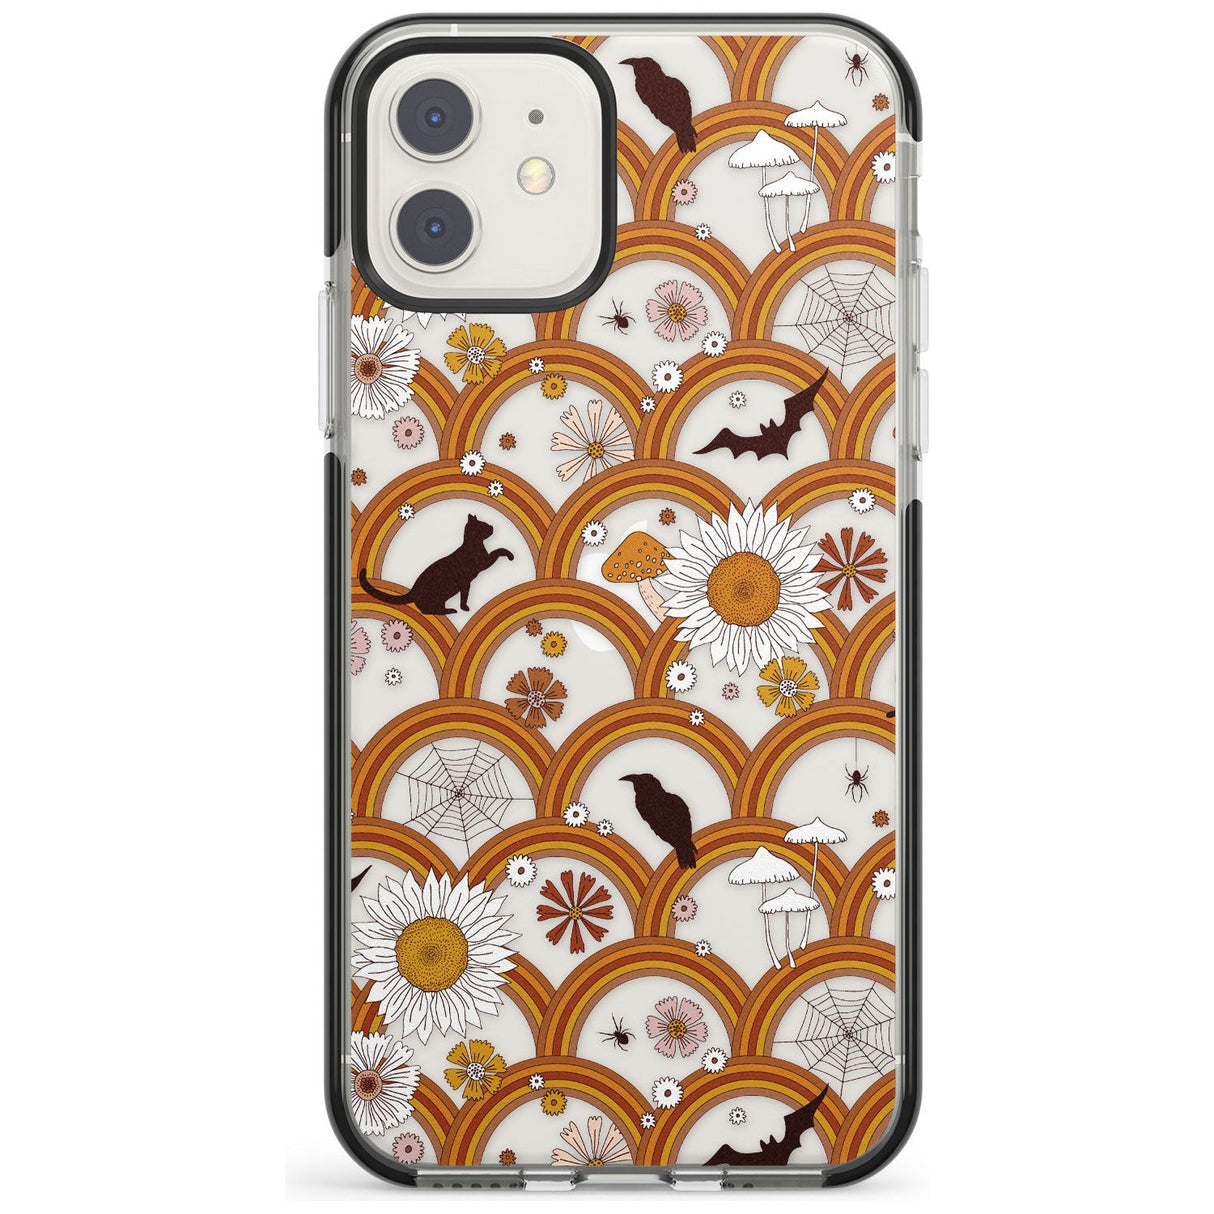 Halloween Skulls and Flowers Impact Phone Case for iPhone 11, iphone 12